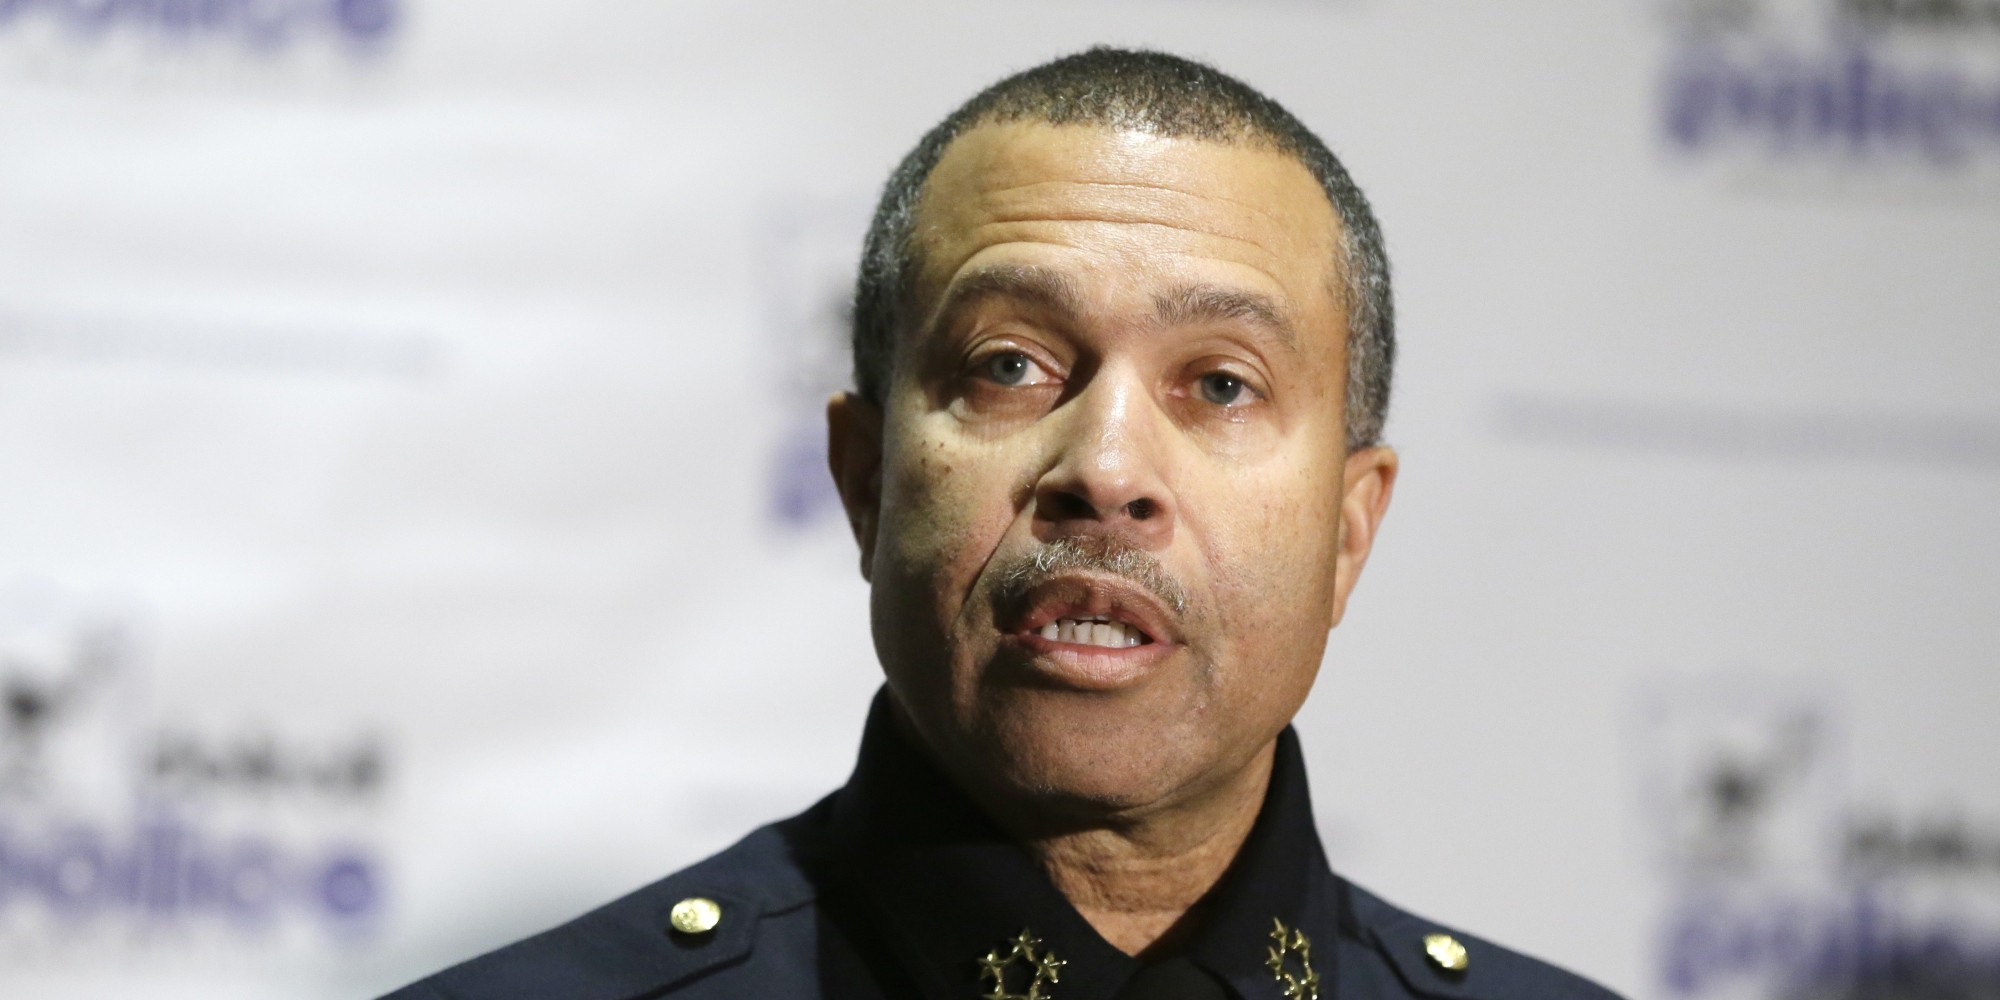 Detroit Police Chief James Craig addresses the media during a news conference in Detroit, Thursday, Nov. 7, 2013. Craig said a man has been apprehended and will be questioned about a barbershop shooting that killed three people and wounded several more on Wednesday night on the city's east side. Craig said that the man was wearing body armor when he was arrested on unrelated felony charges in suburban Rochester after the shootings. (AP Photo/Carlos Osorio)